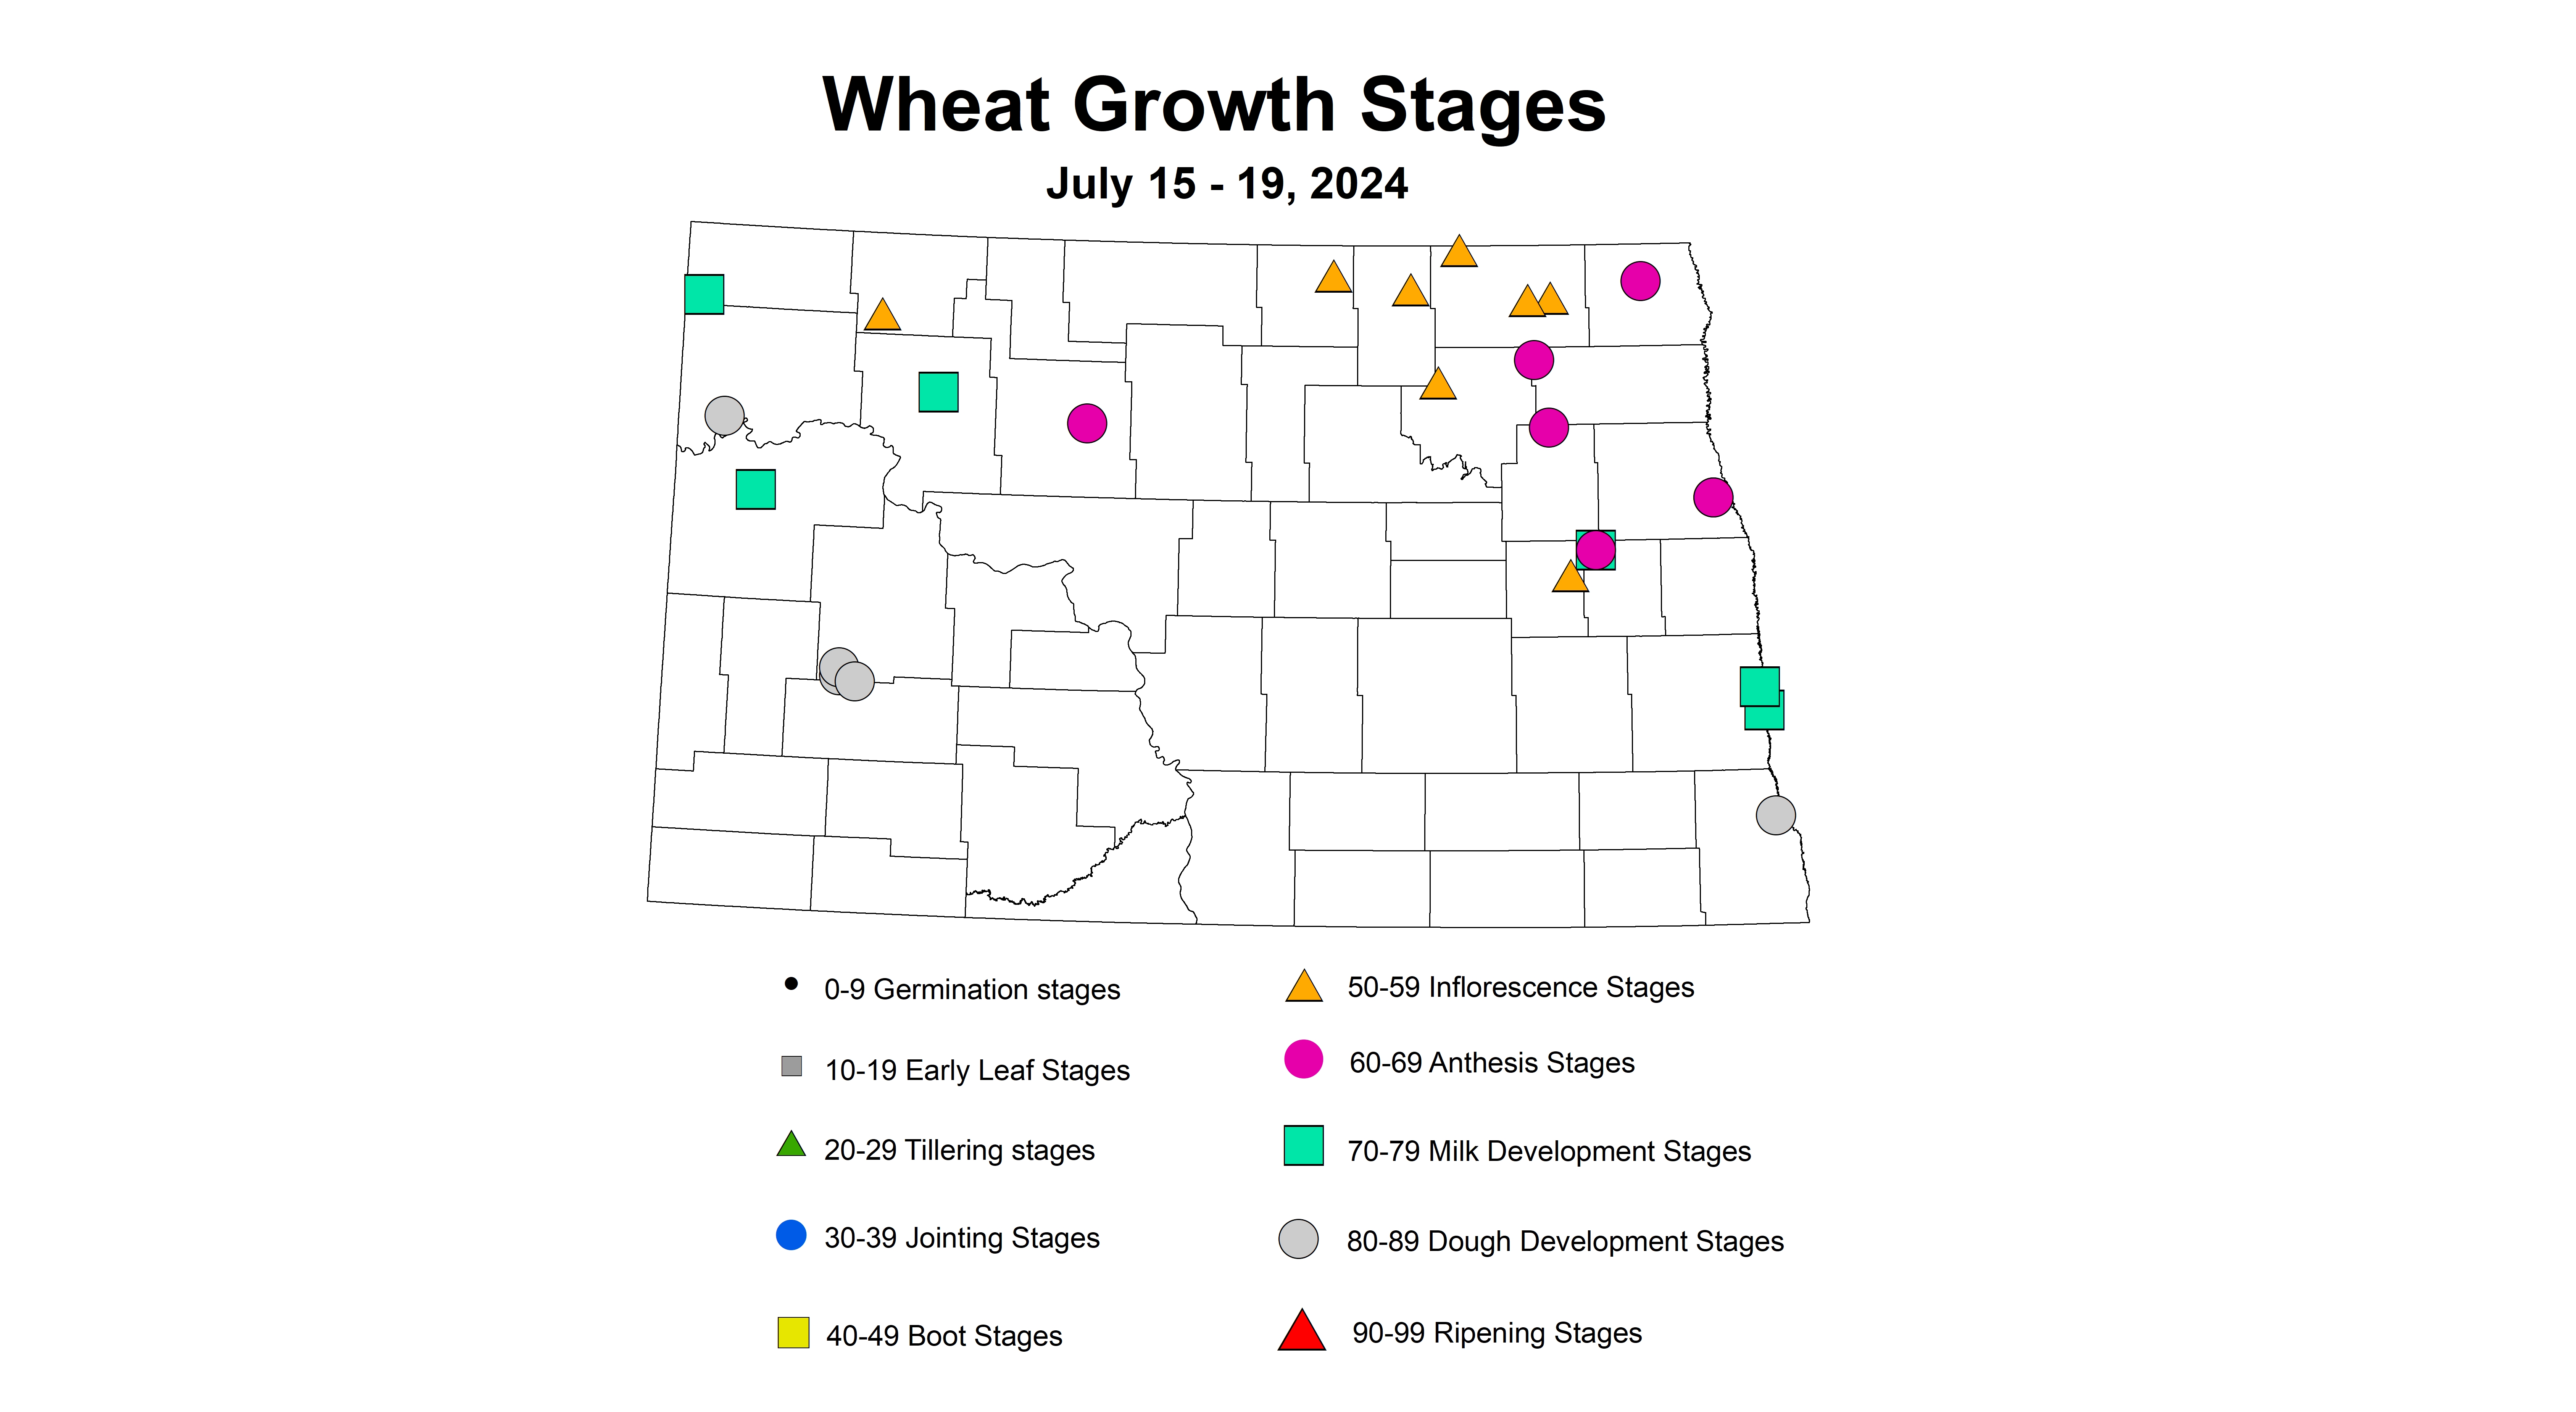 wheat growth stages 7.15-7.19 2024